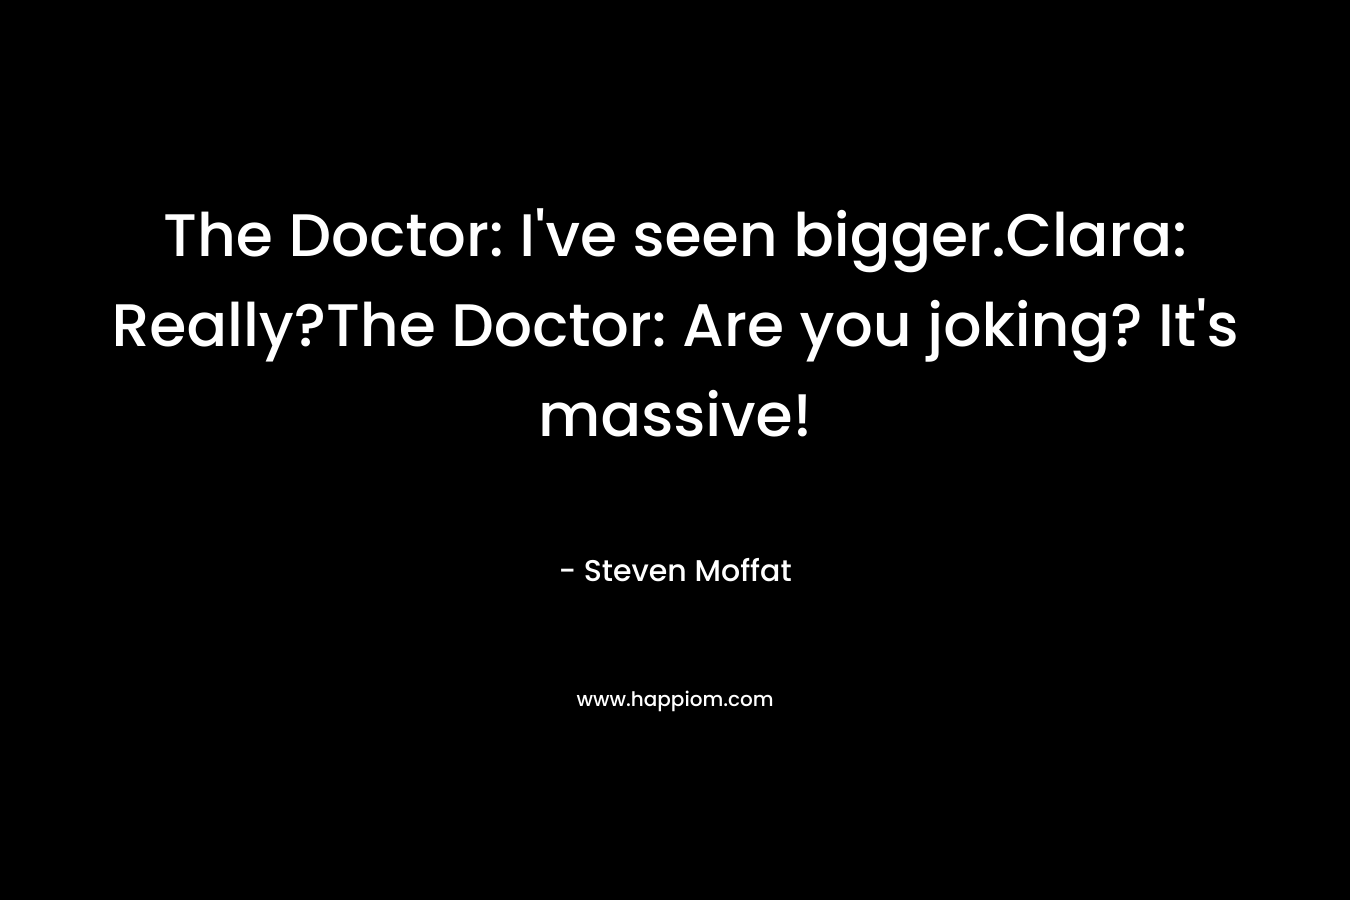 The Doctor: I’ve seen bigger.Clara: Really?The Doctor: Are you joking? It’s massive! – Steven Moffat